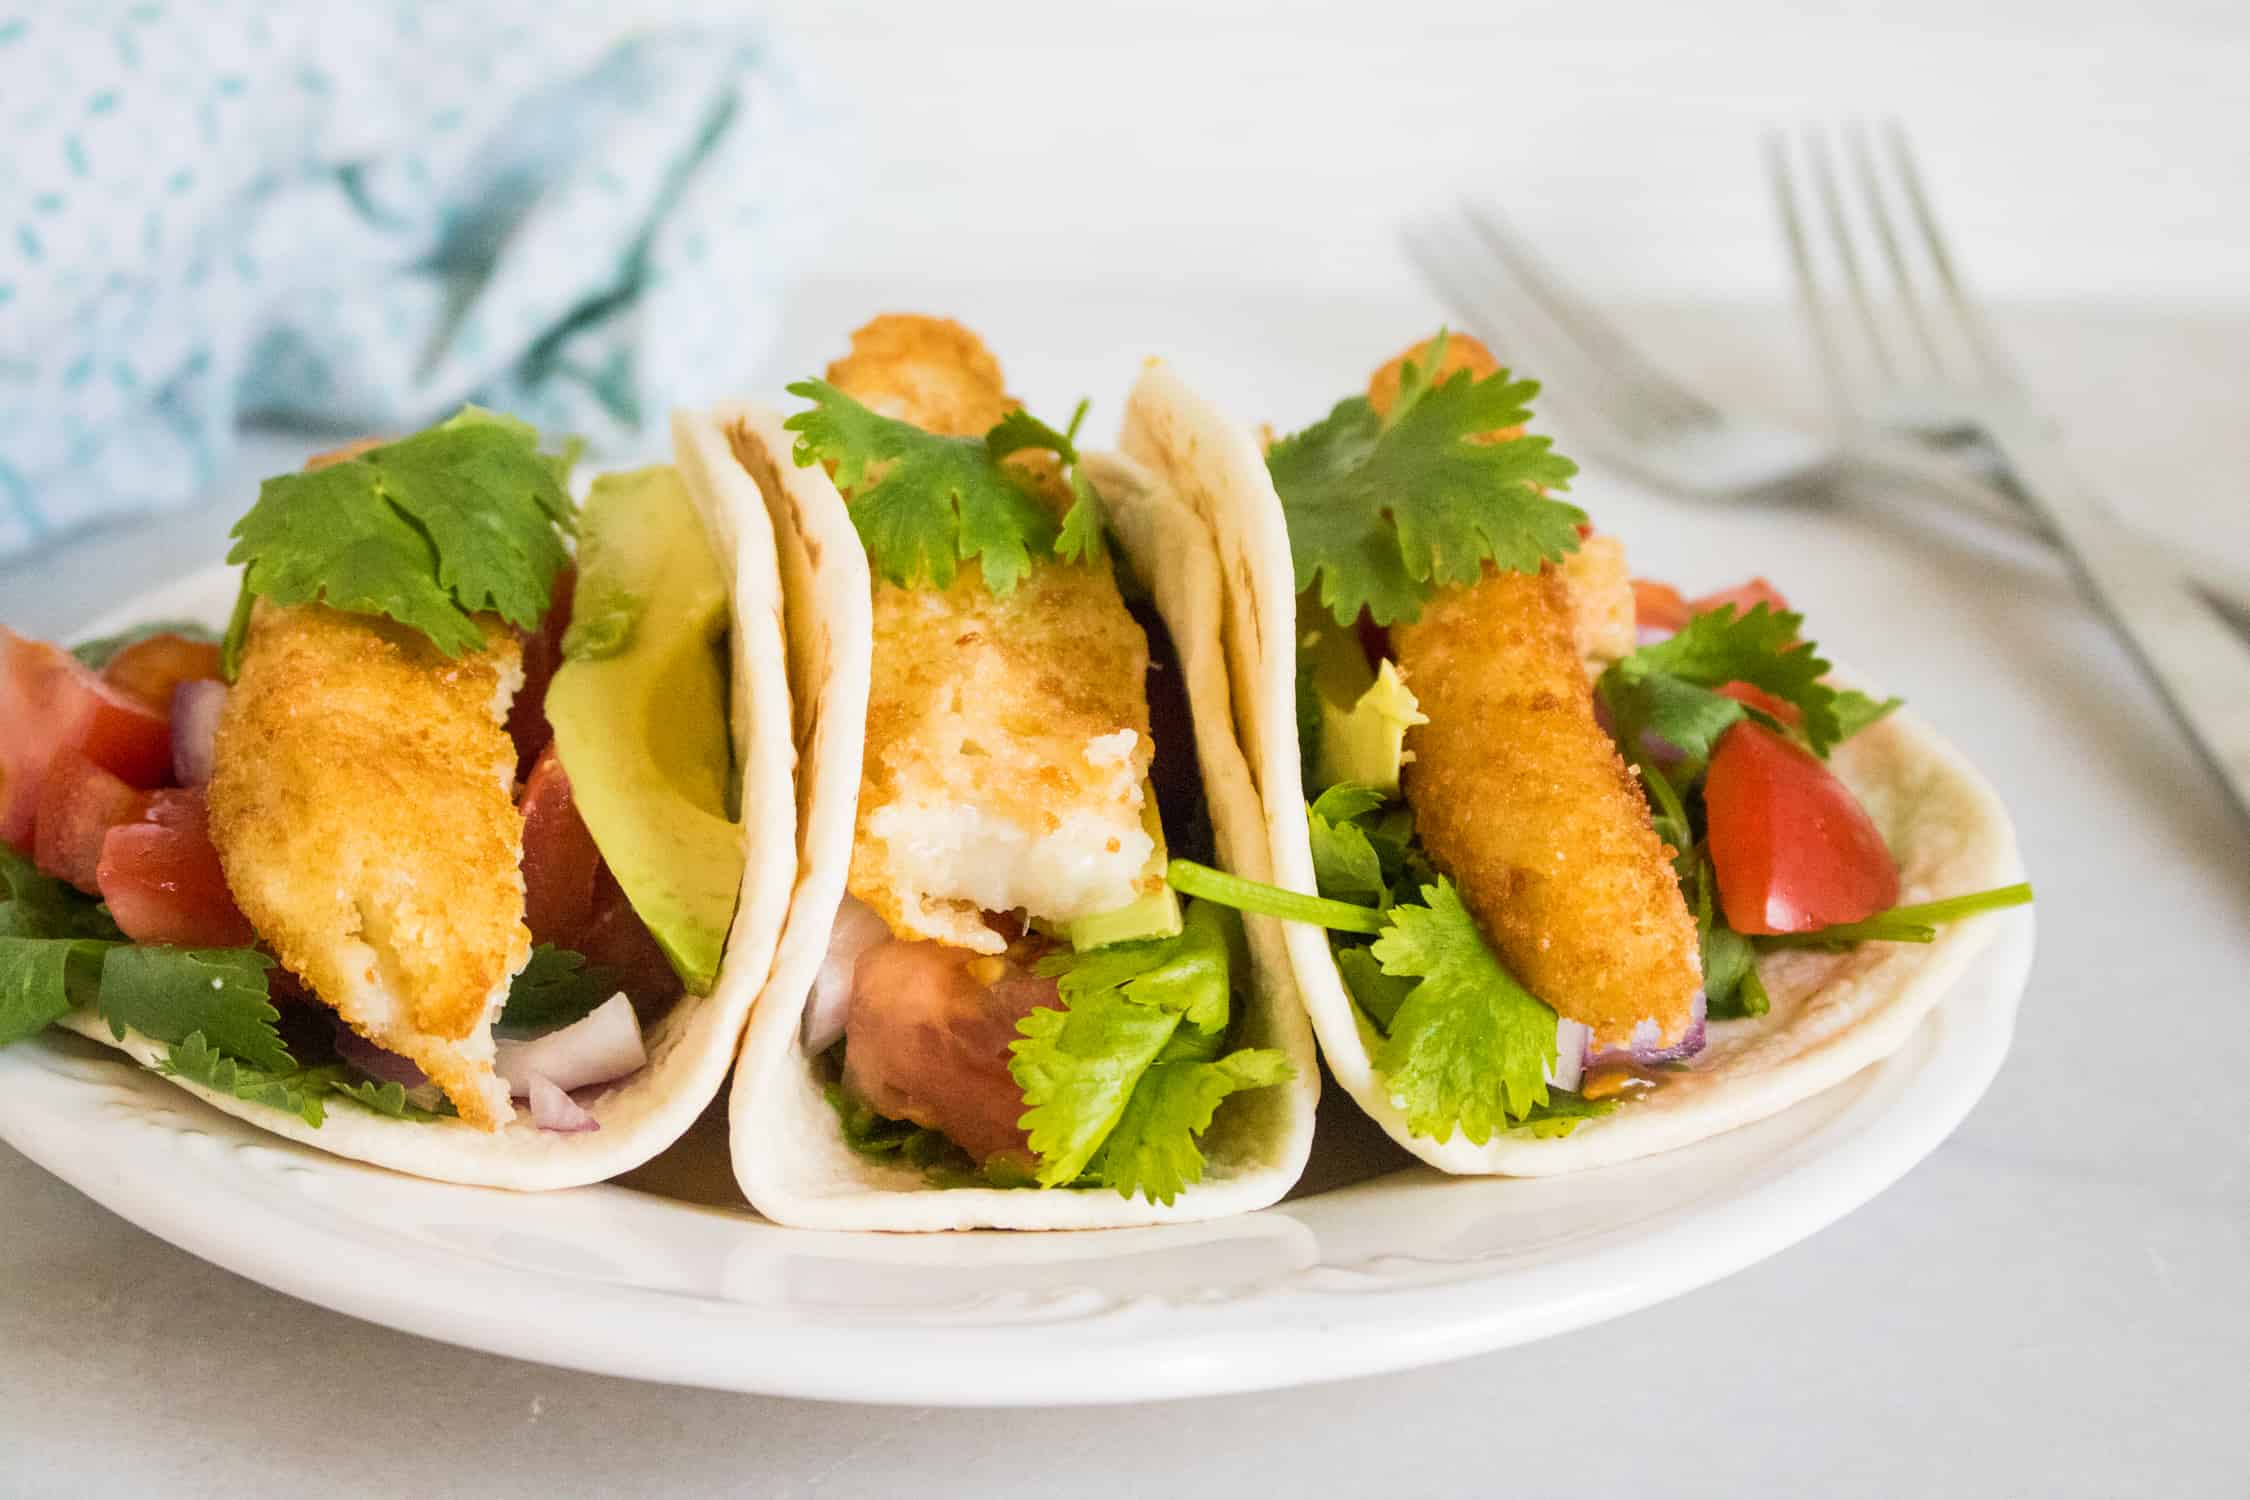 close up of the completed fish taco recipe featuring three tacos on a white plate set next to two silver forks and a blue print cloth napkin 